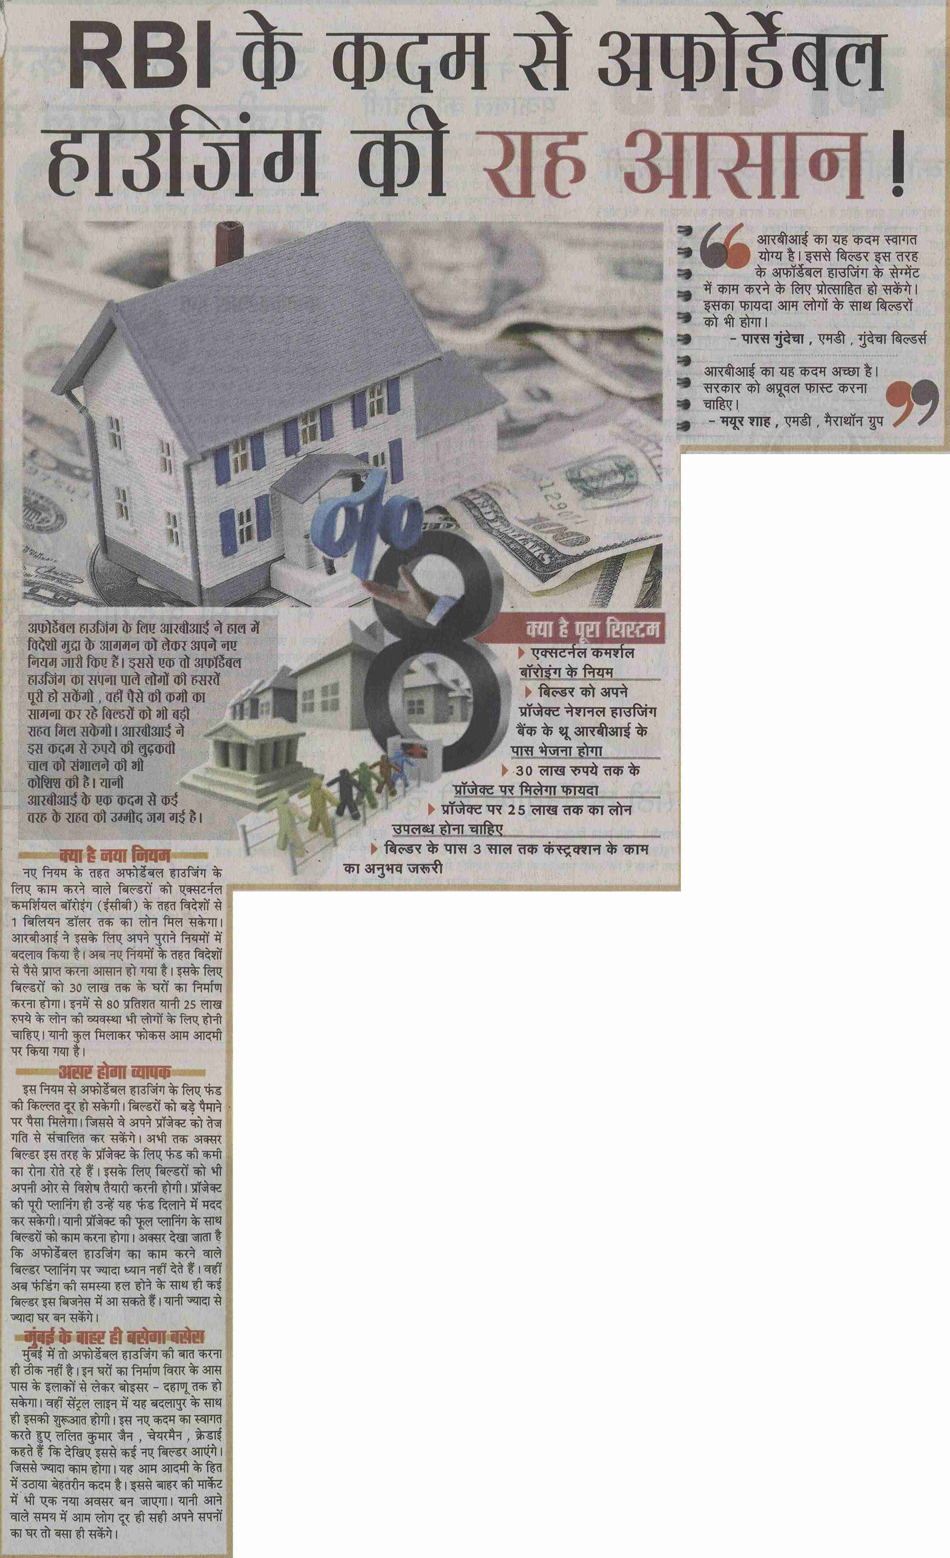 Way to affordable housing made easy with RBI steps